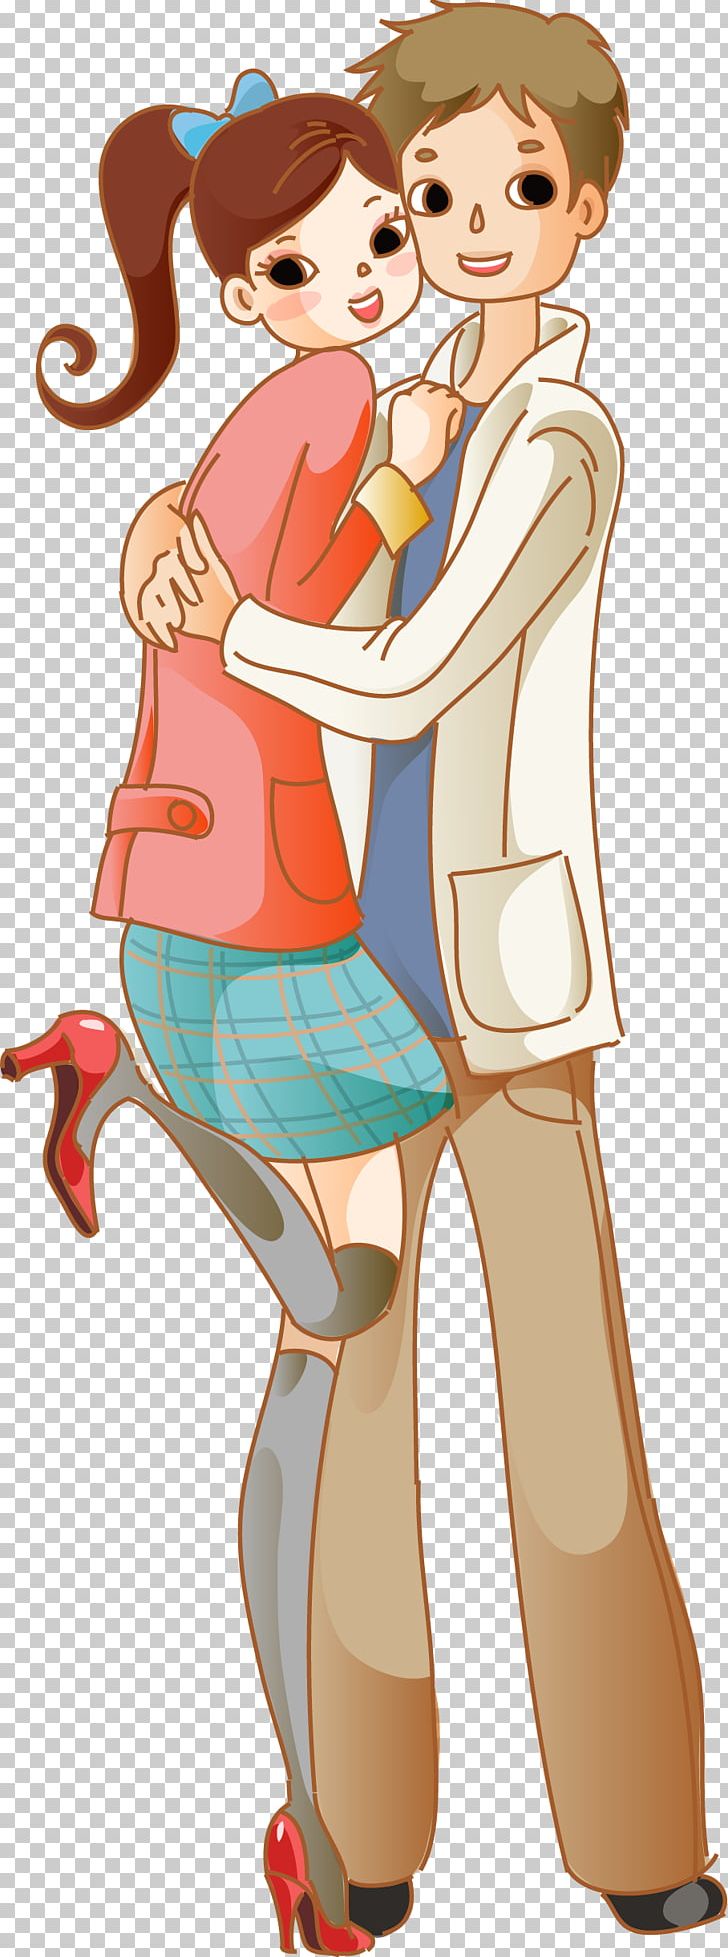 Significant Other Cartoon Illustration PNG, Clipart, Arm, Cartoonist, Couple, Couples, Fictional Character Free PNG Download